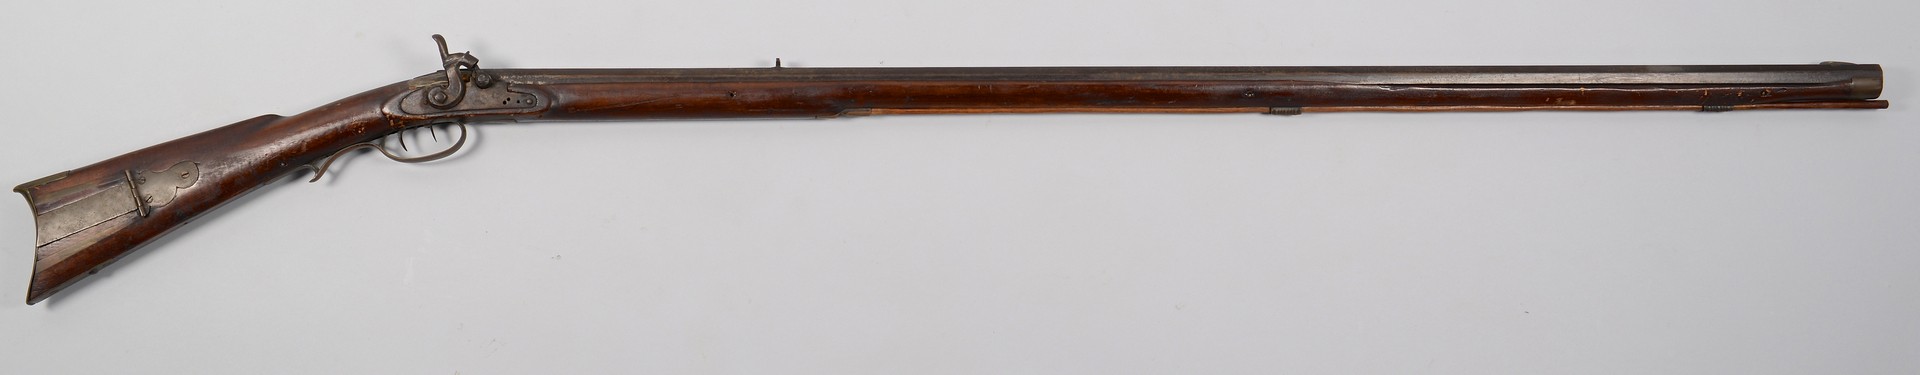 Lot 525: Leman Full Stock Long Rifle with Horn and Bag